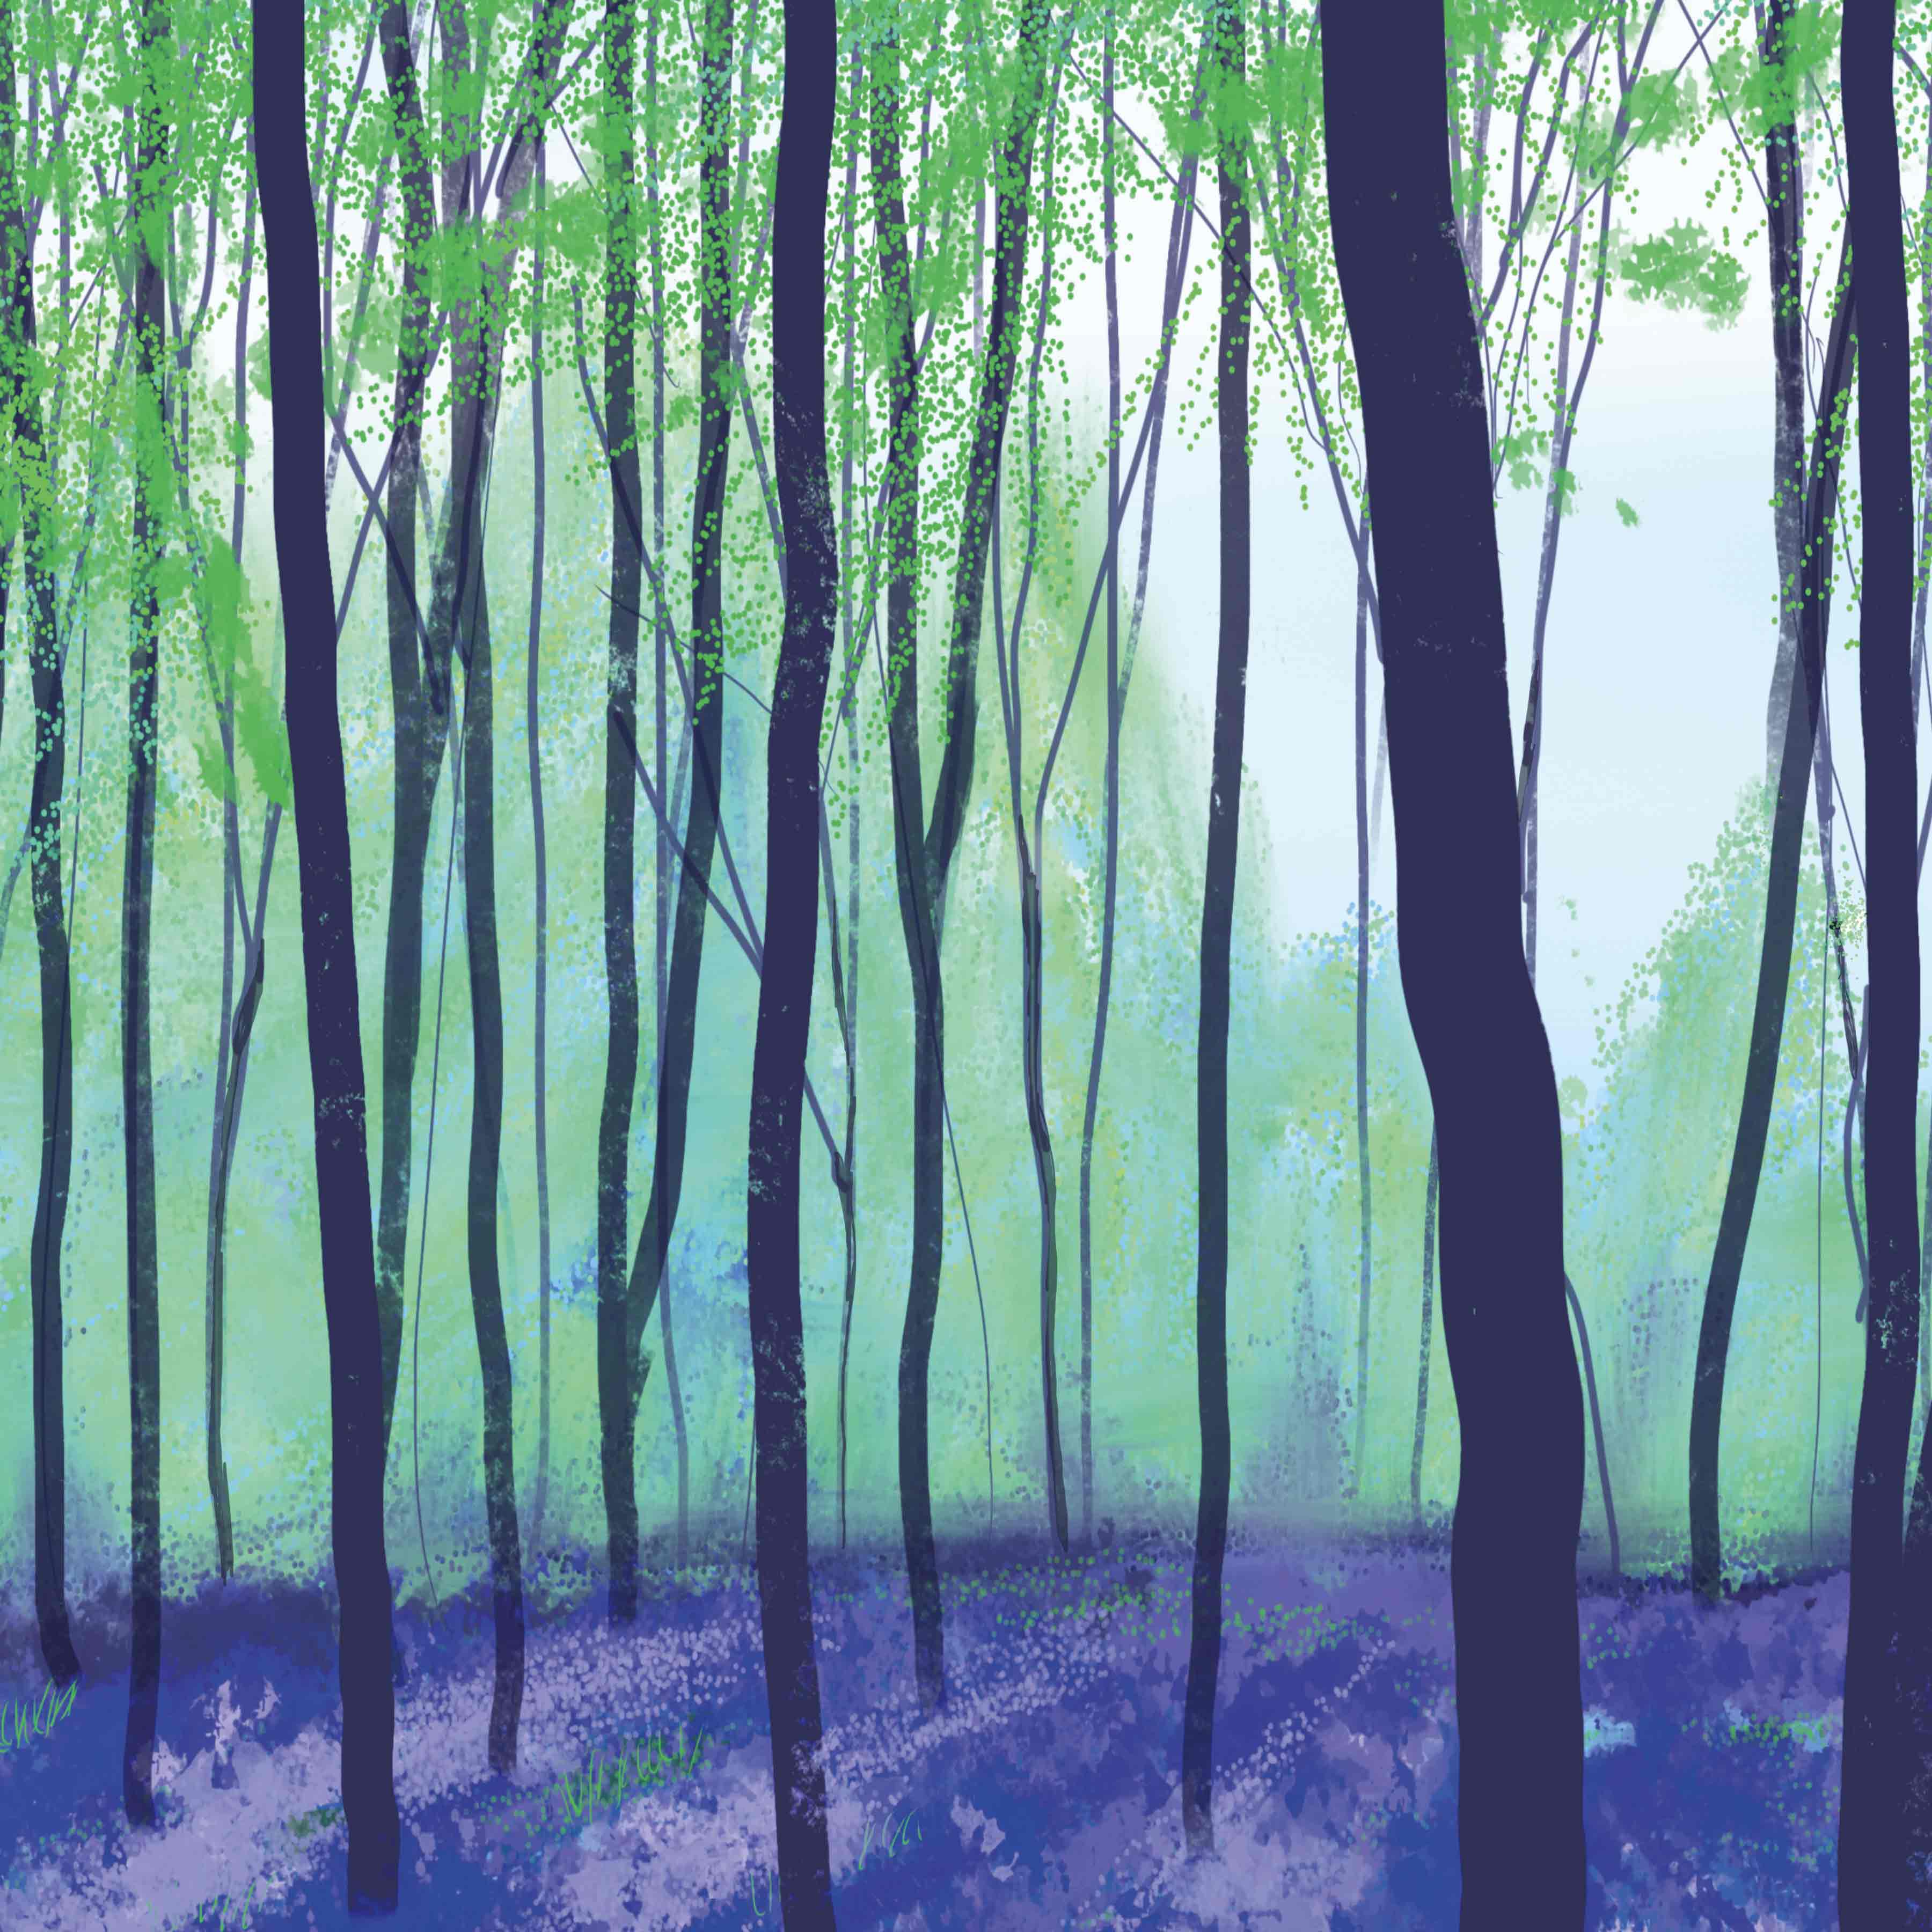 Art Greeting Card by Carla Vize-Martin, Bluebell Wood, Digital Painting, A bluebell wood